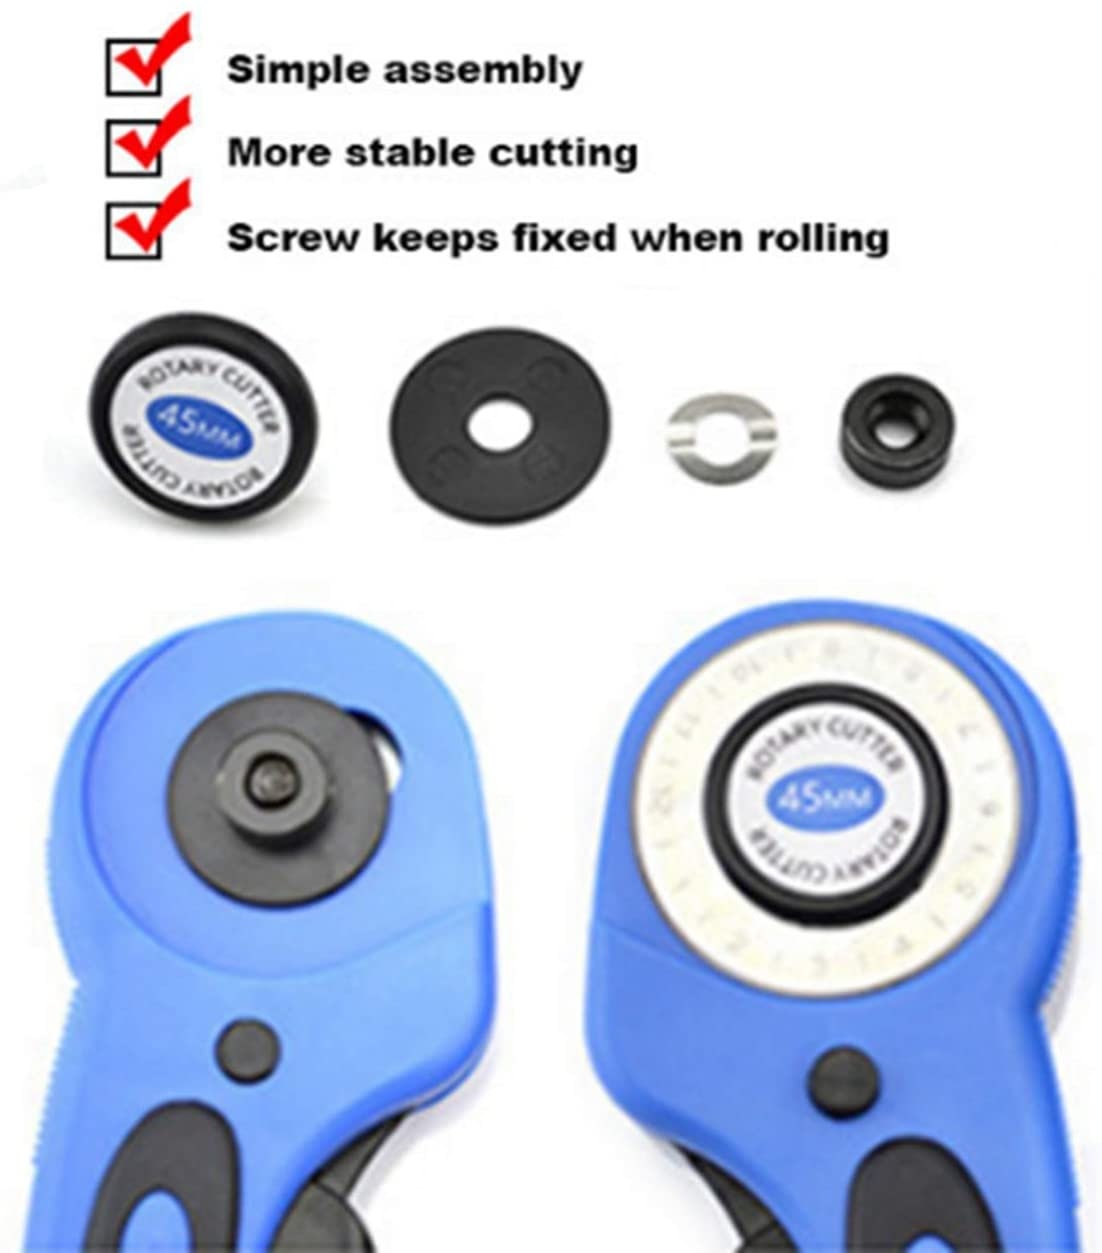 Gerich 45mm Round Wheel Rotary Cutter Quilting Sewing Roller Fabric Cutting  Tools Blue